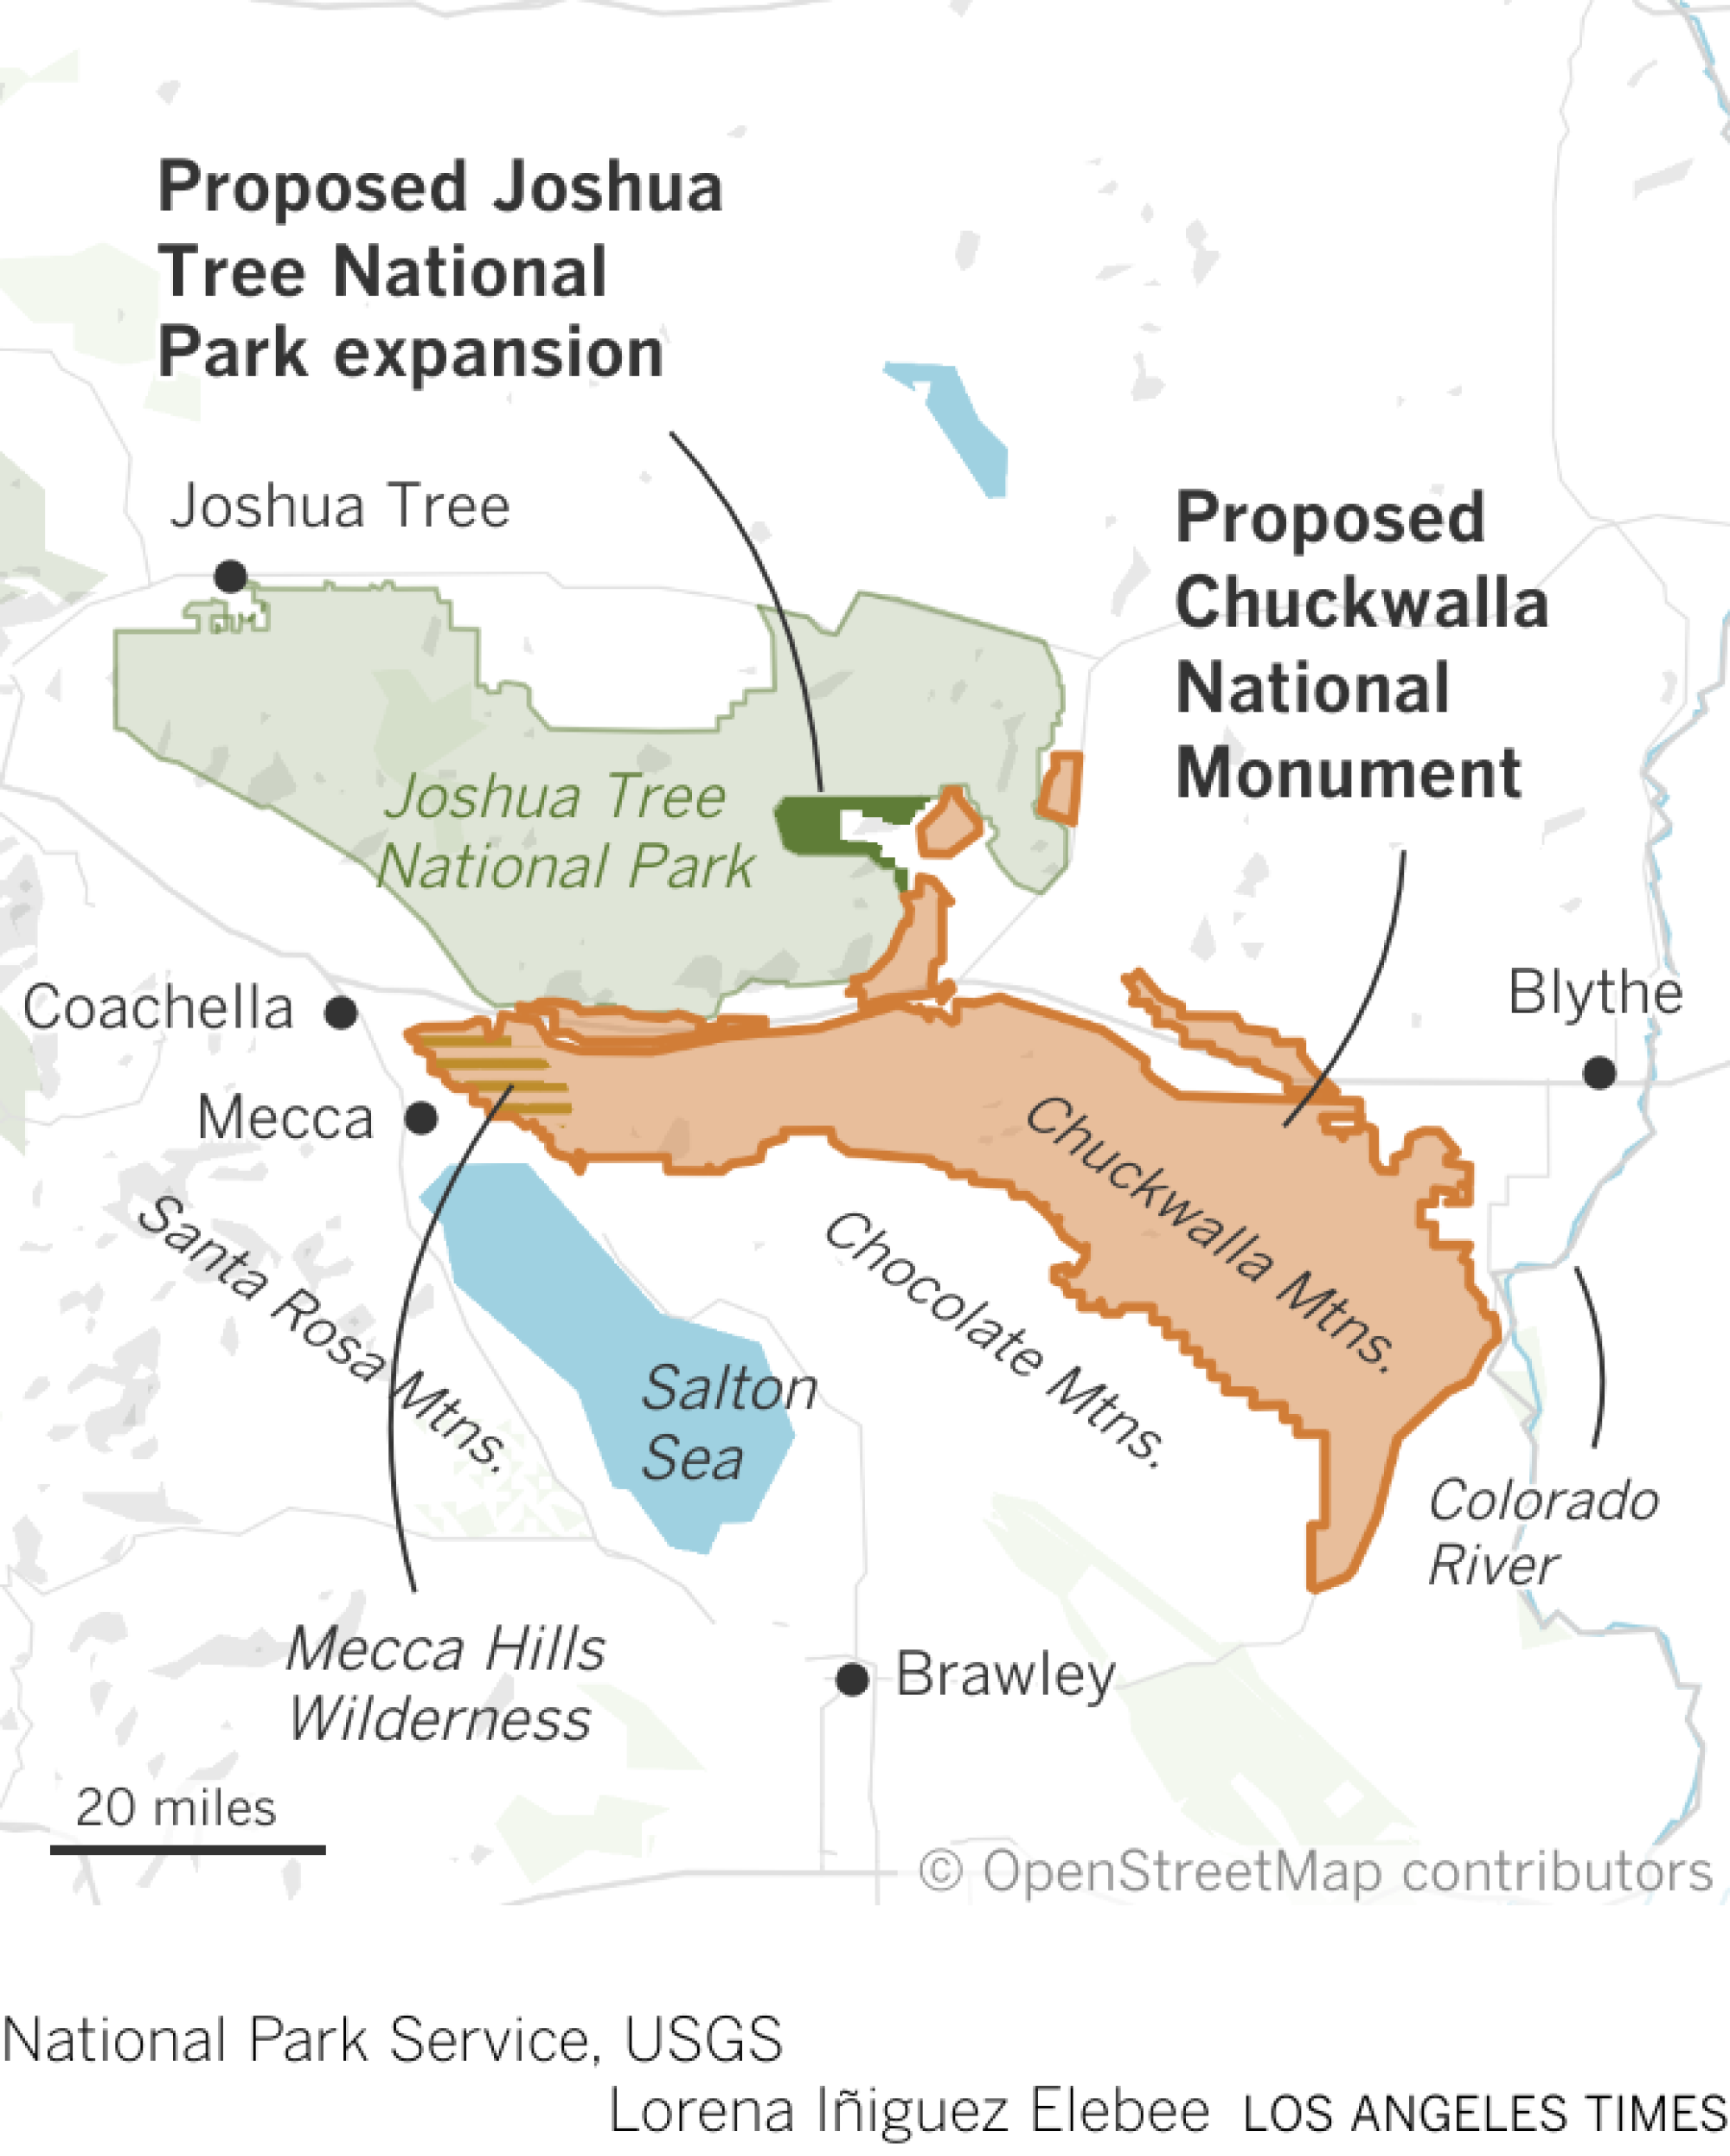 Map locating proposed expansion to Joshua Tree National Park and a proposed Chuckawalla National Monument.